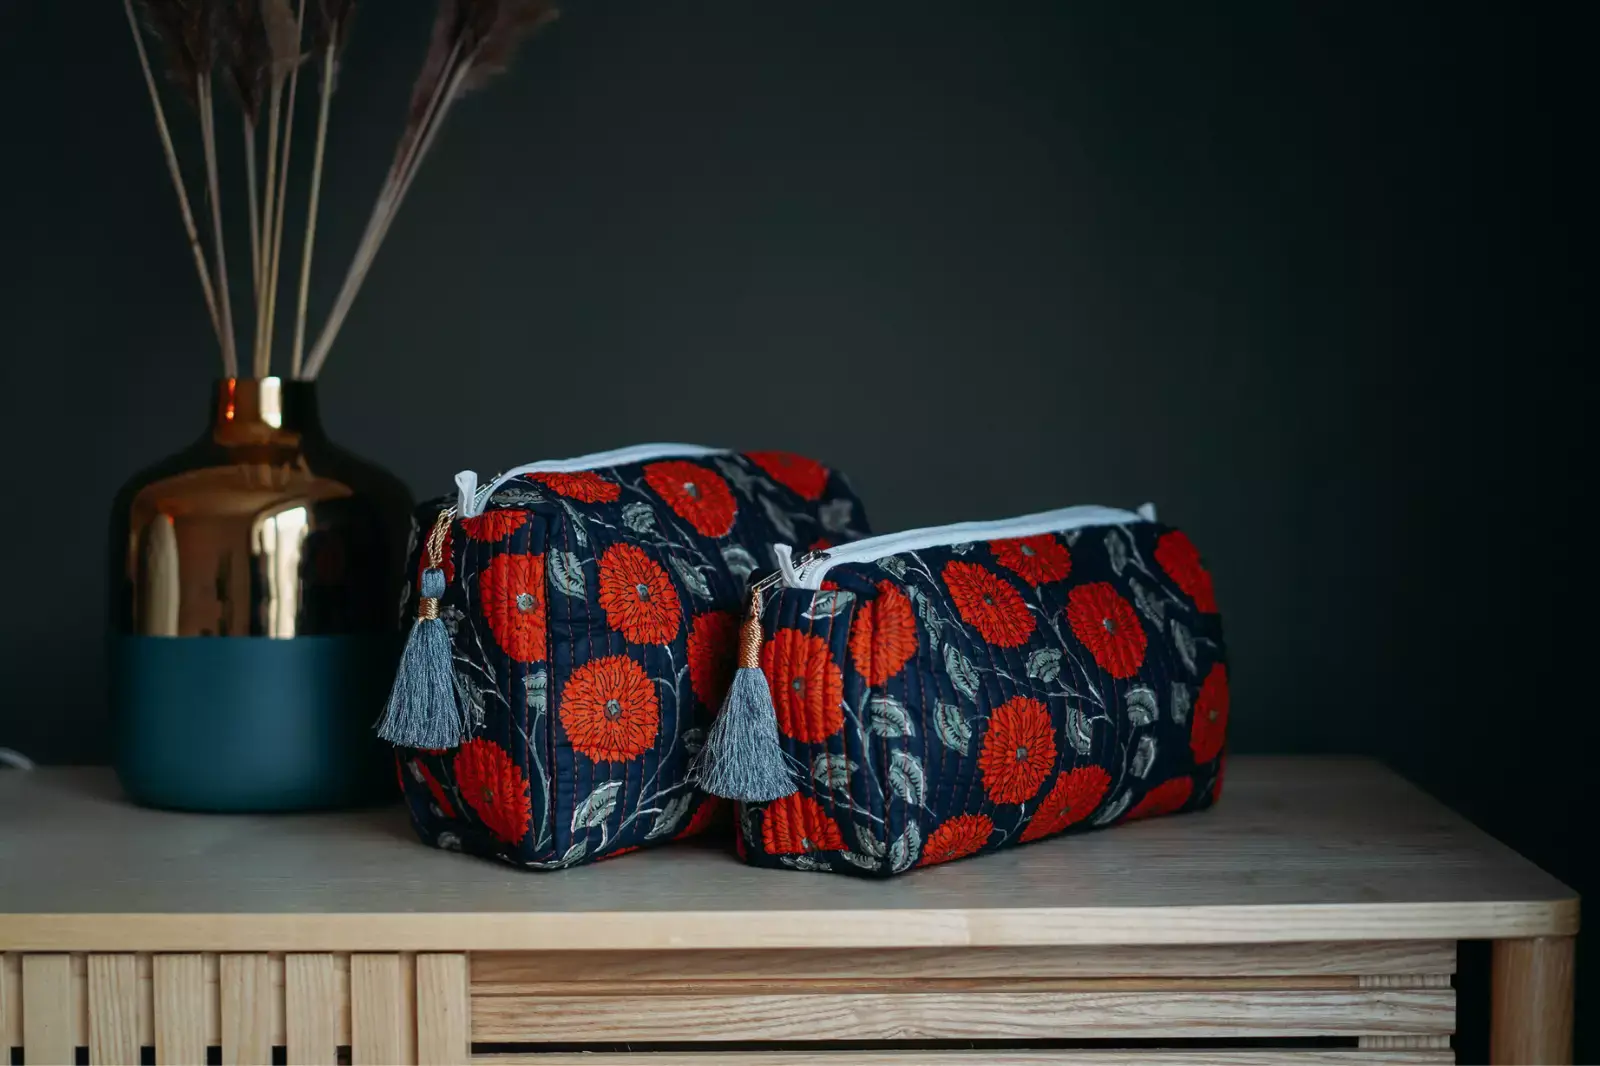 9. Wash bags